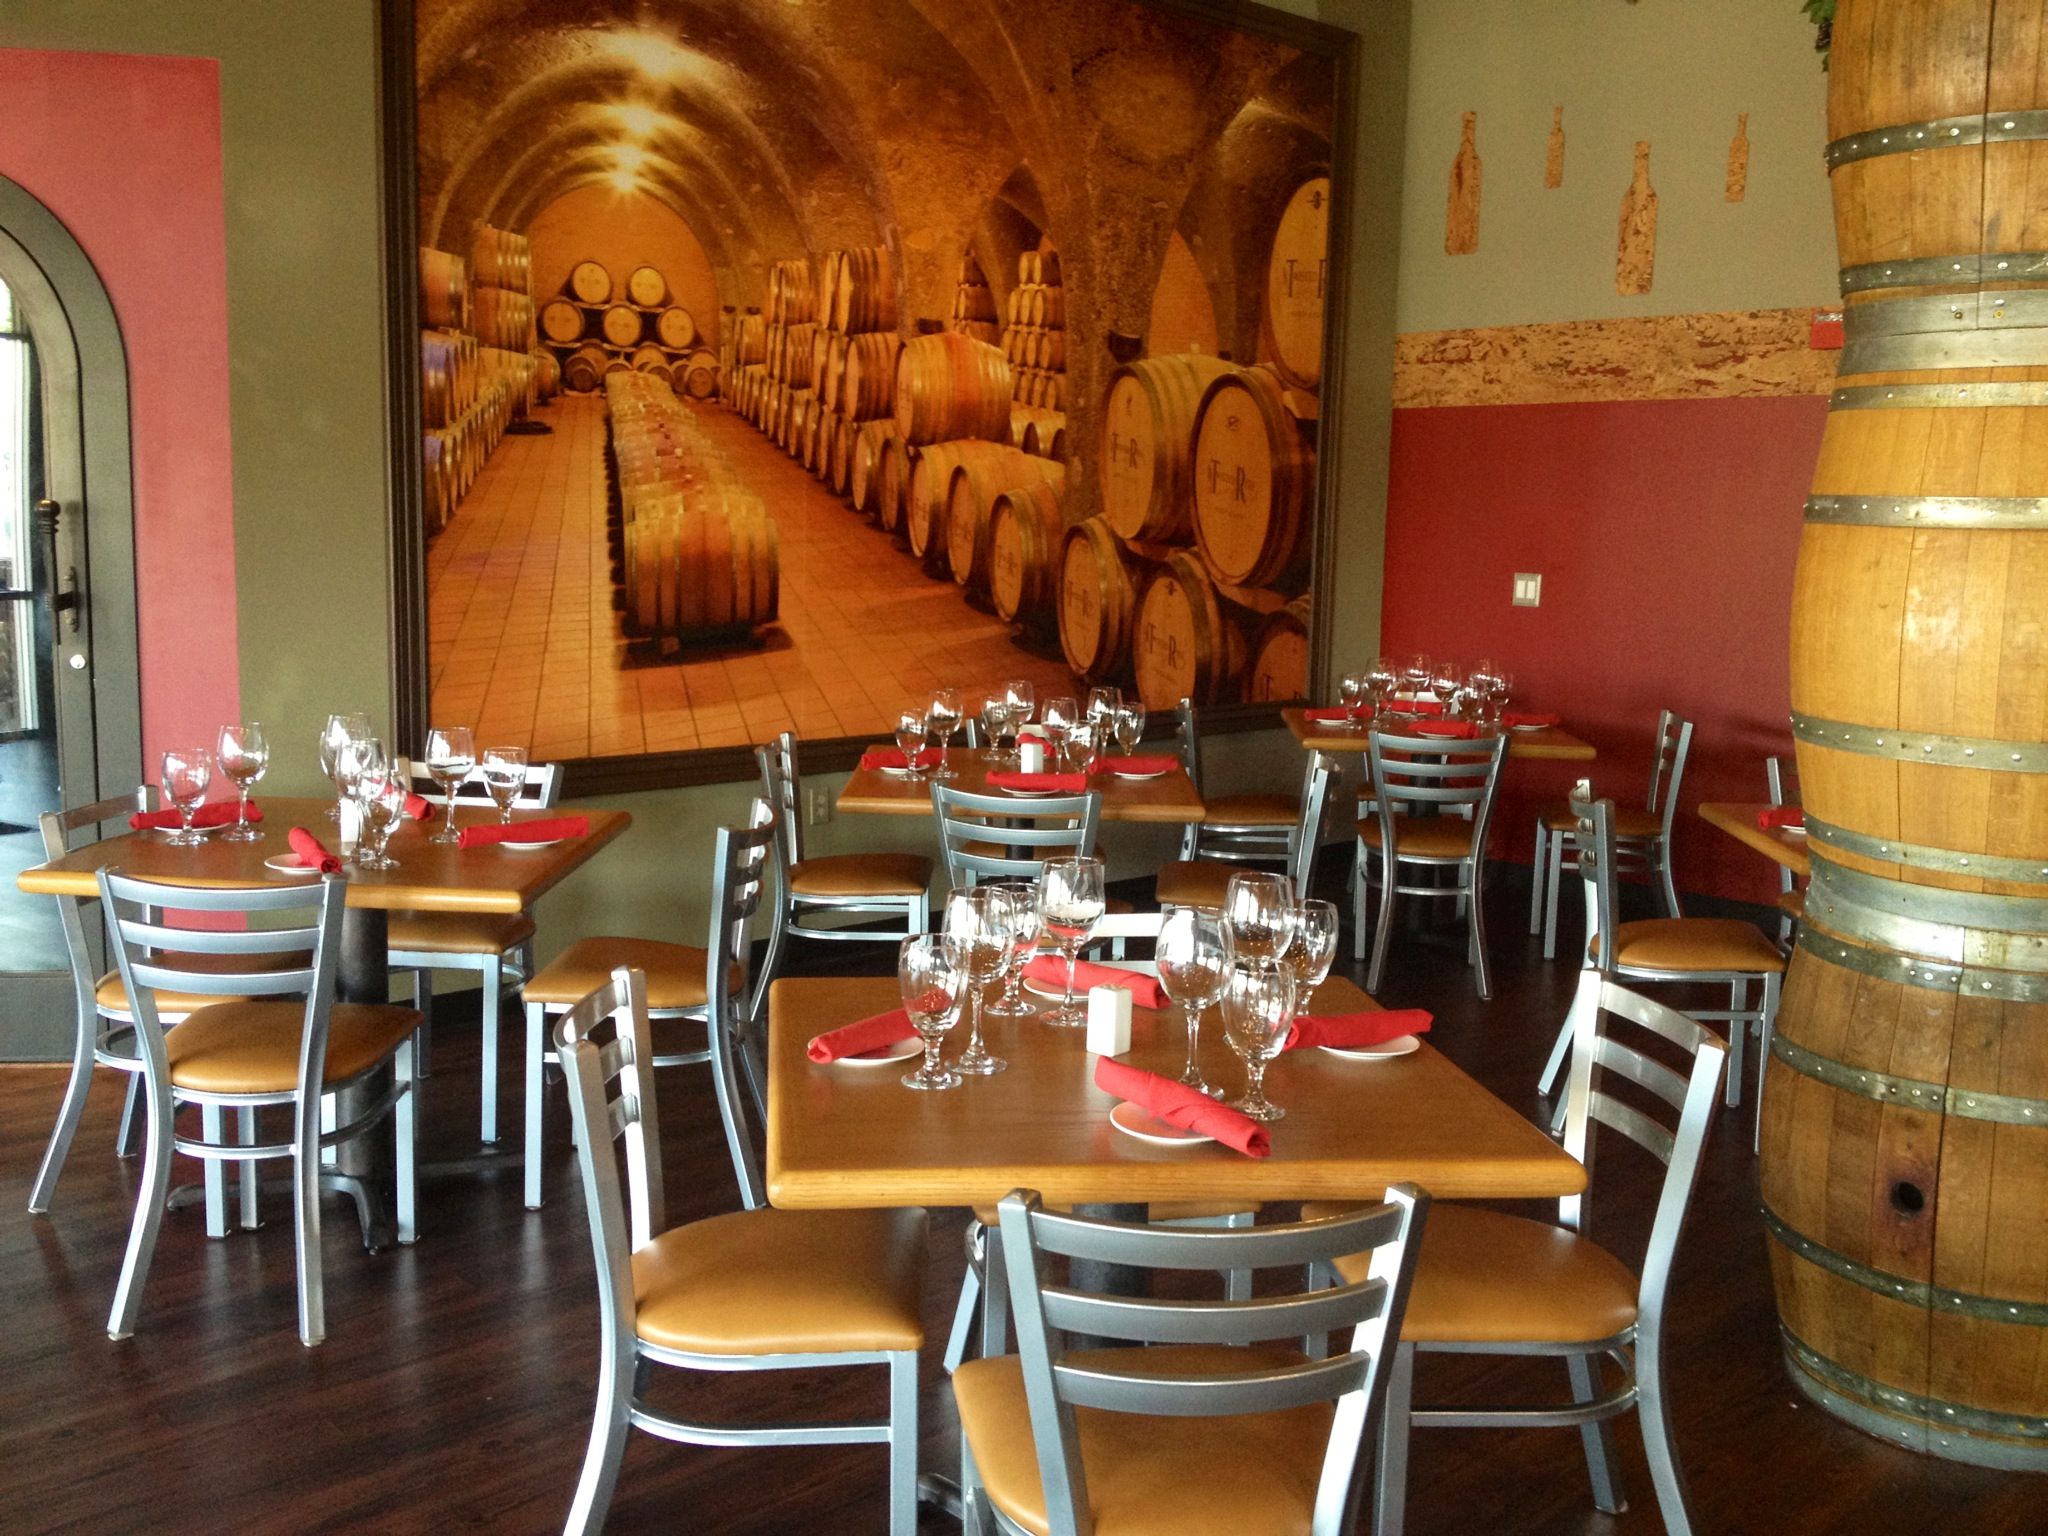 Inside winery and eatery